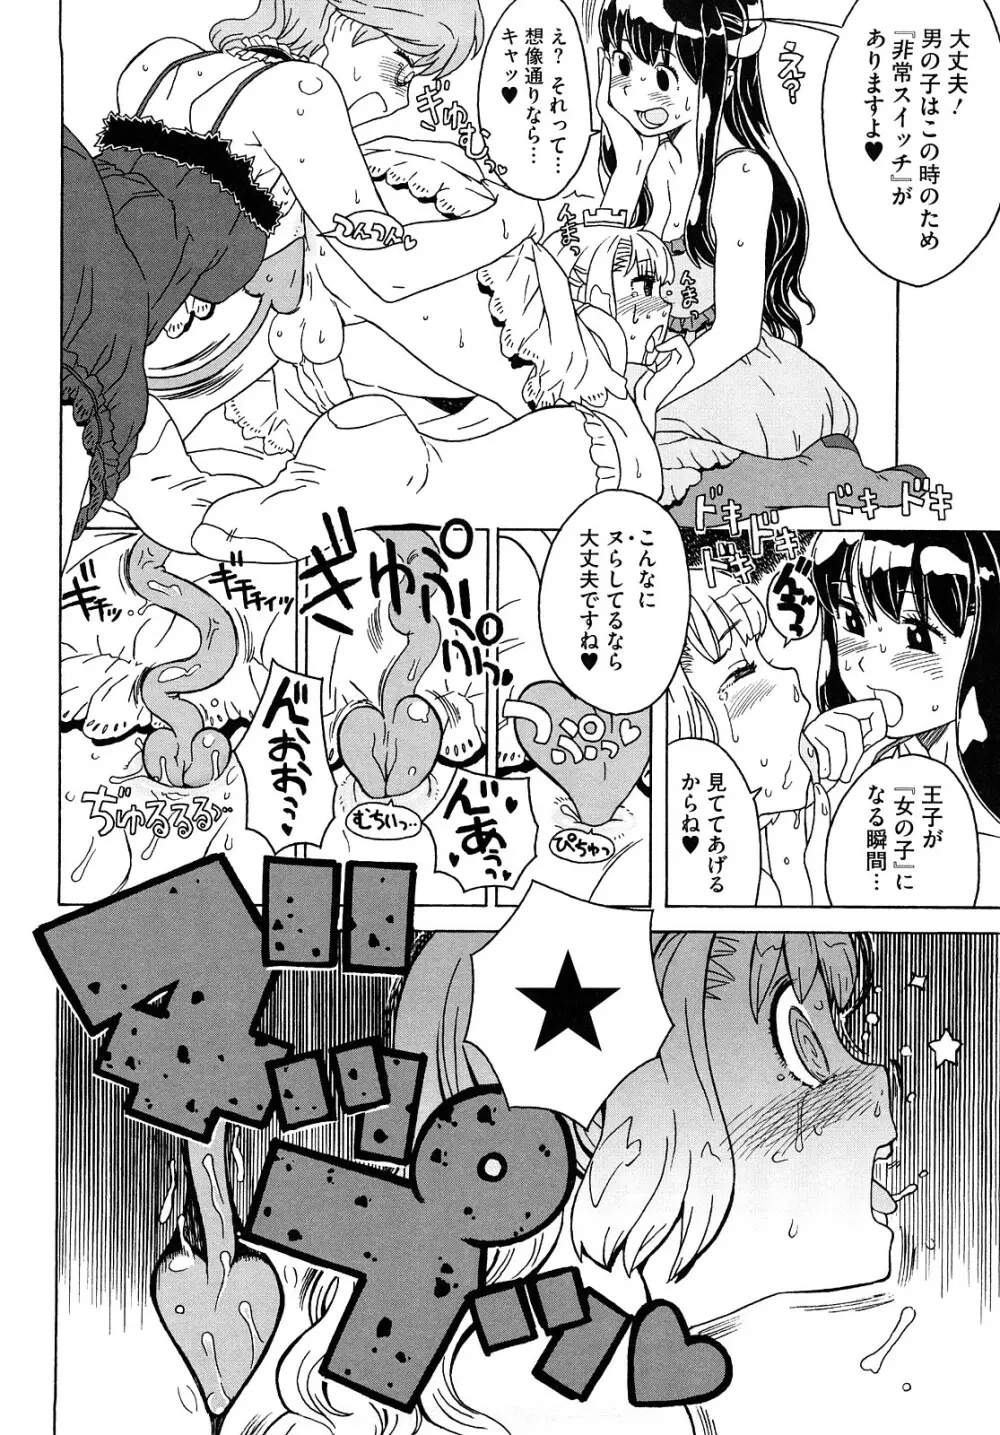 Lord of Trash 完全版 Page.227